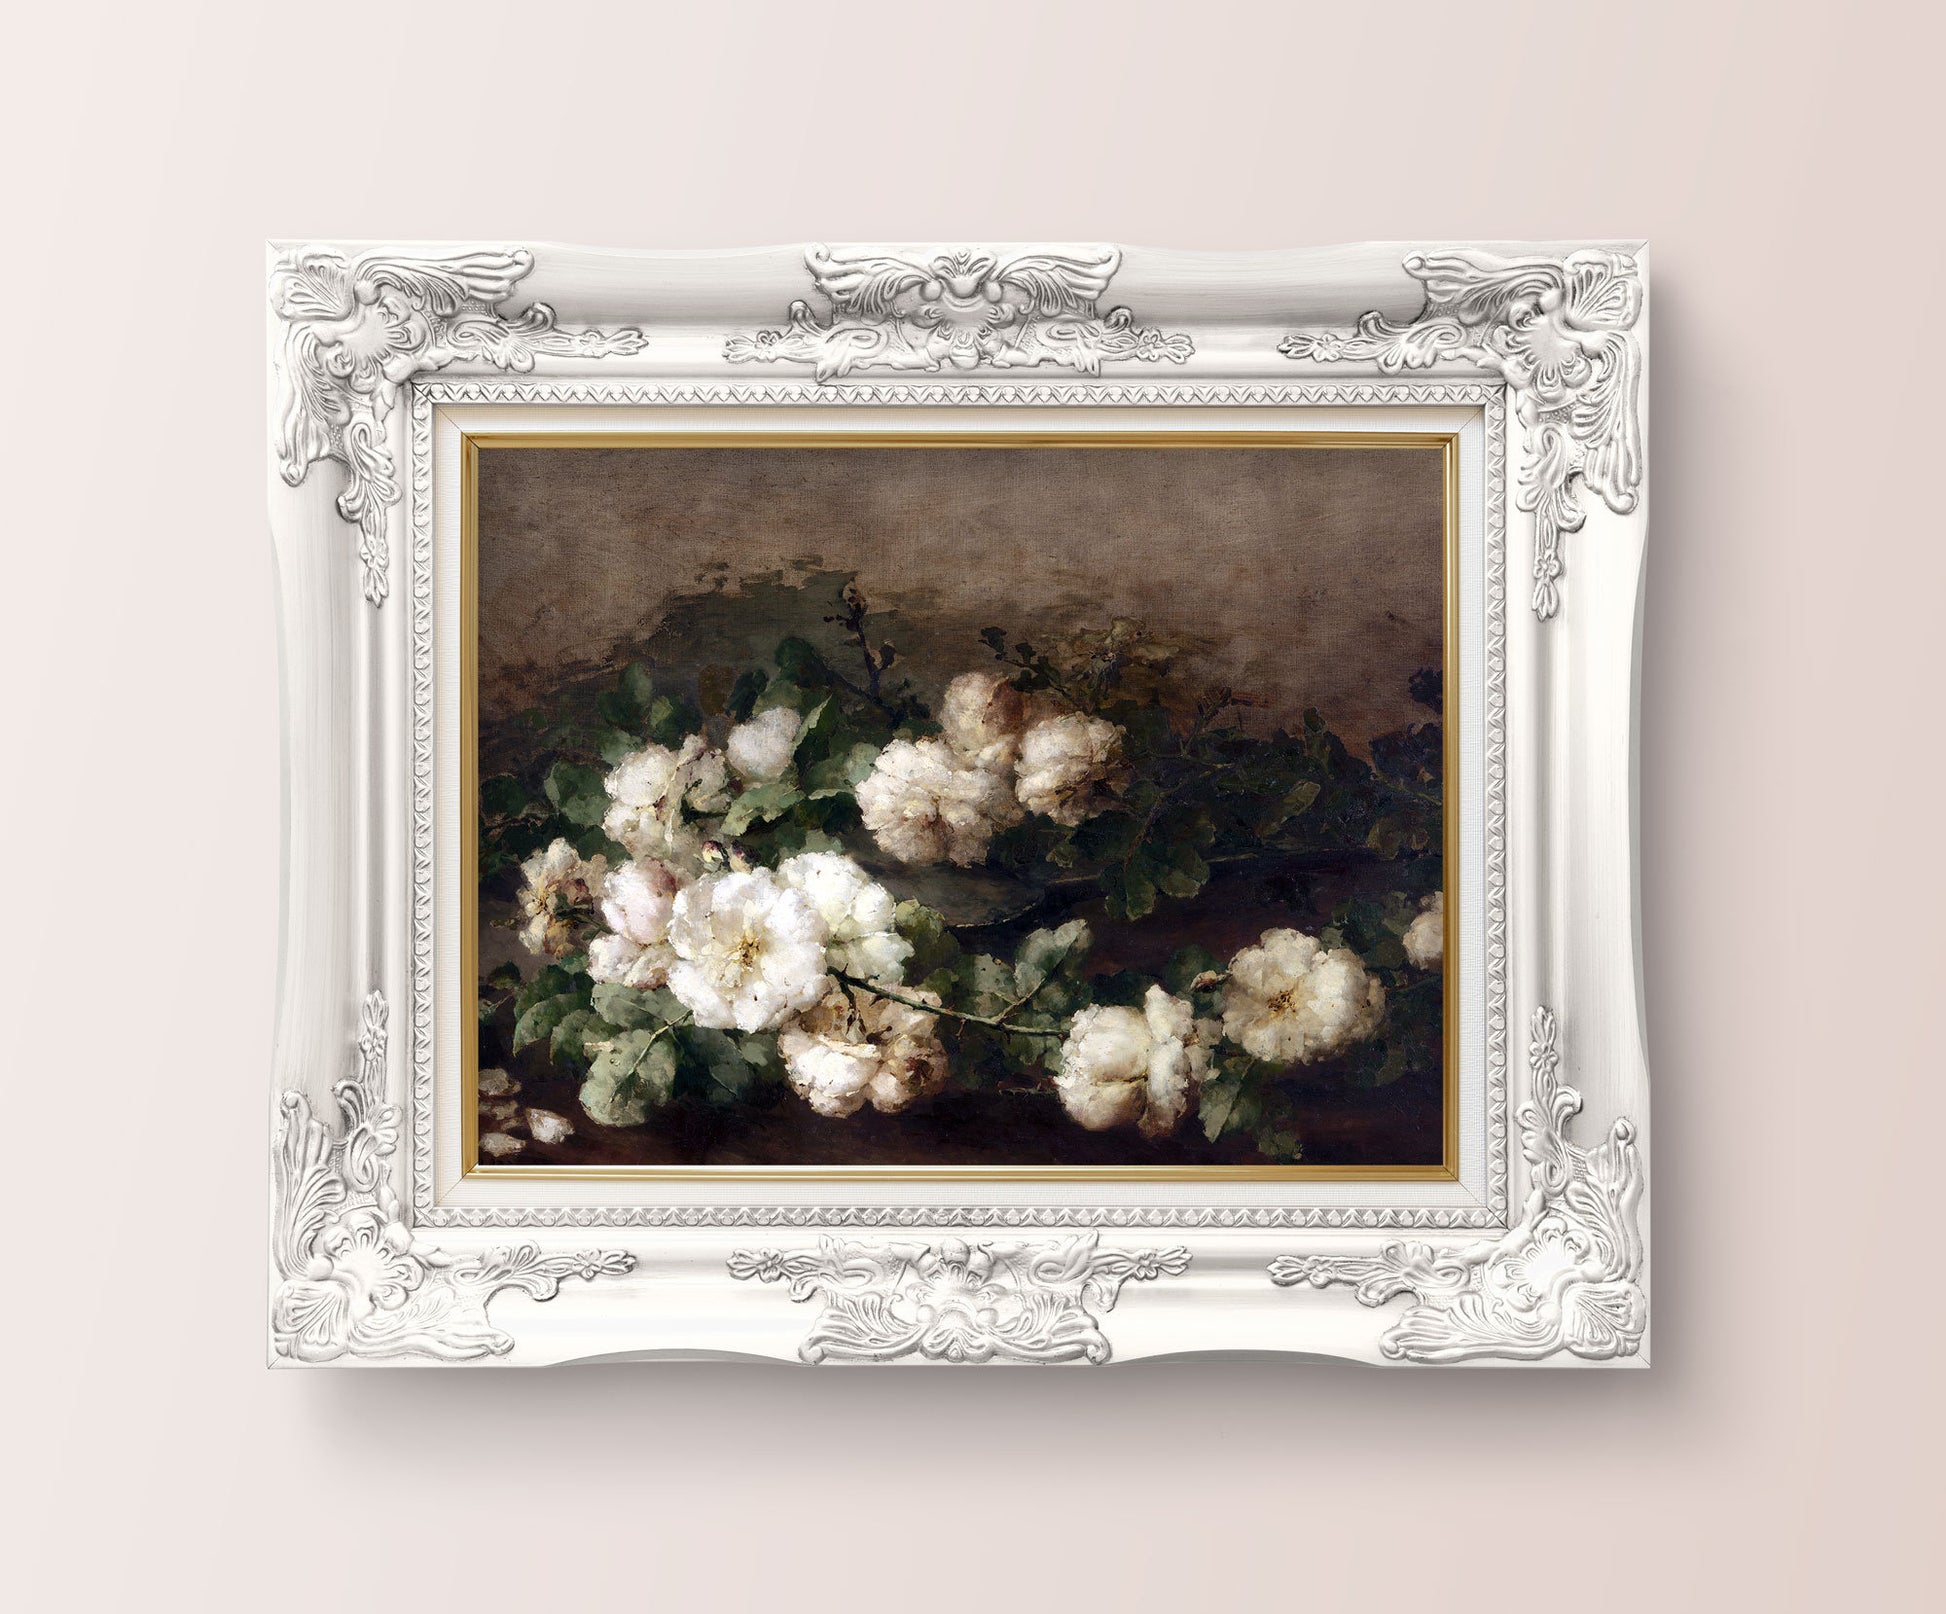 Flowers Art Poster with white and black - Vintage Copy Picture Art - Bedroom Floral decor - Printed and Shipped - Laying White Flowers